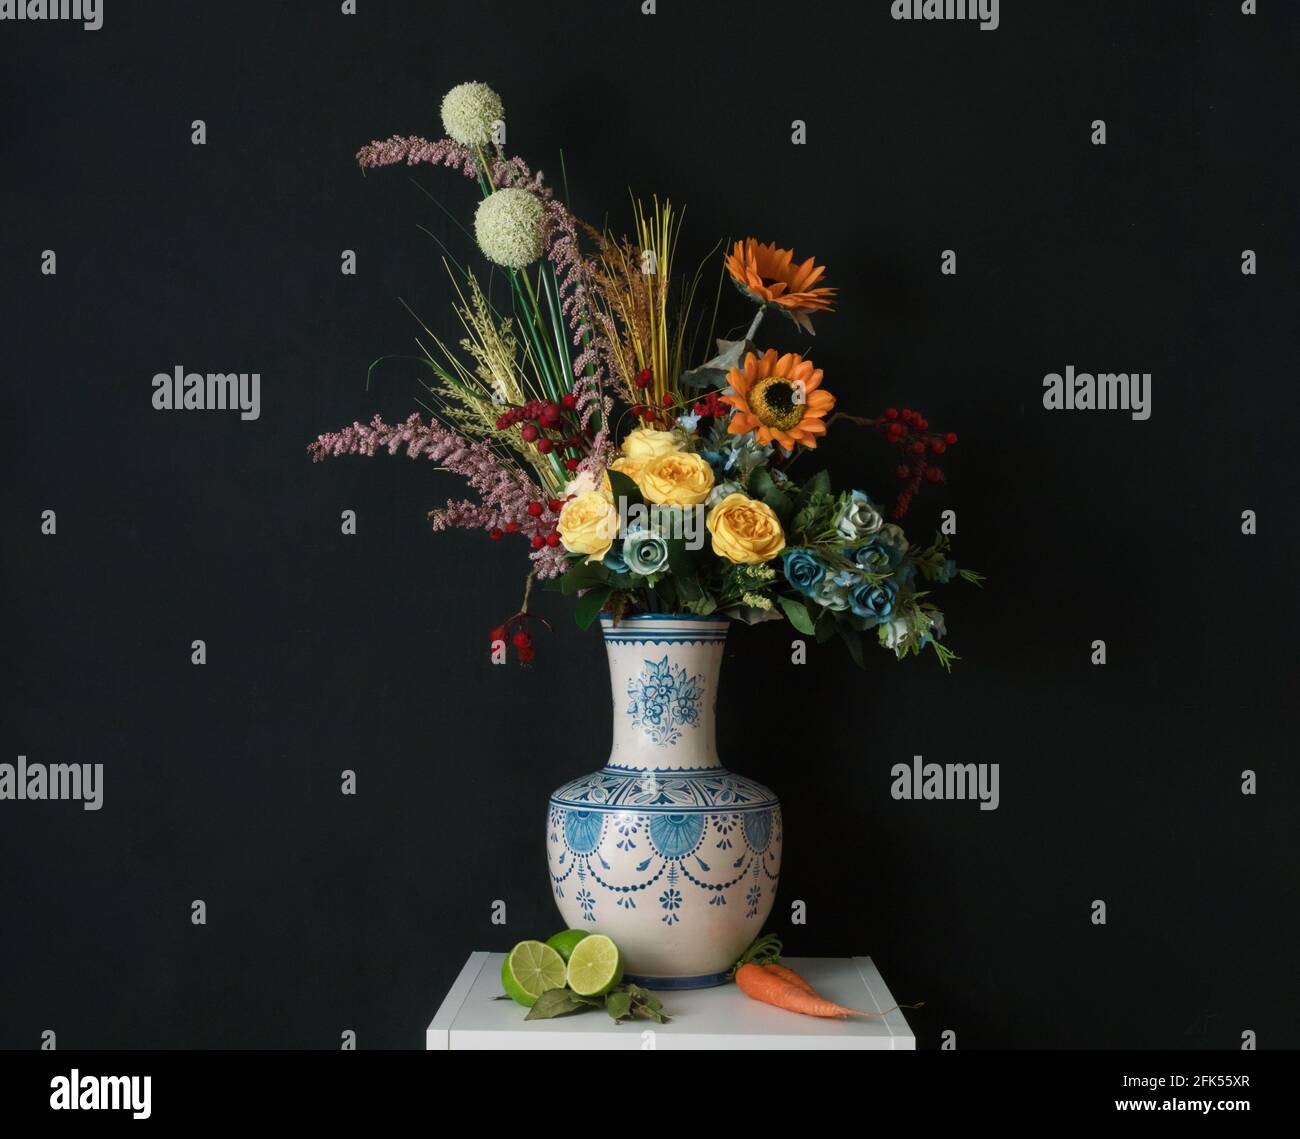 Ceramic vase with coloured flowers on a black background. Still life of flowers Stock Photo